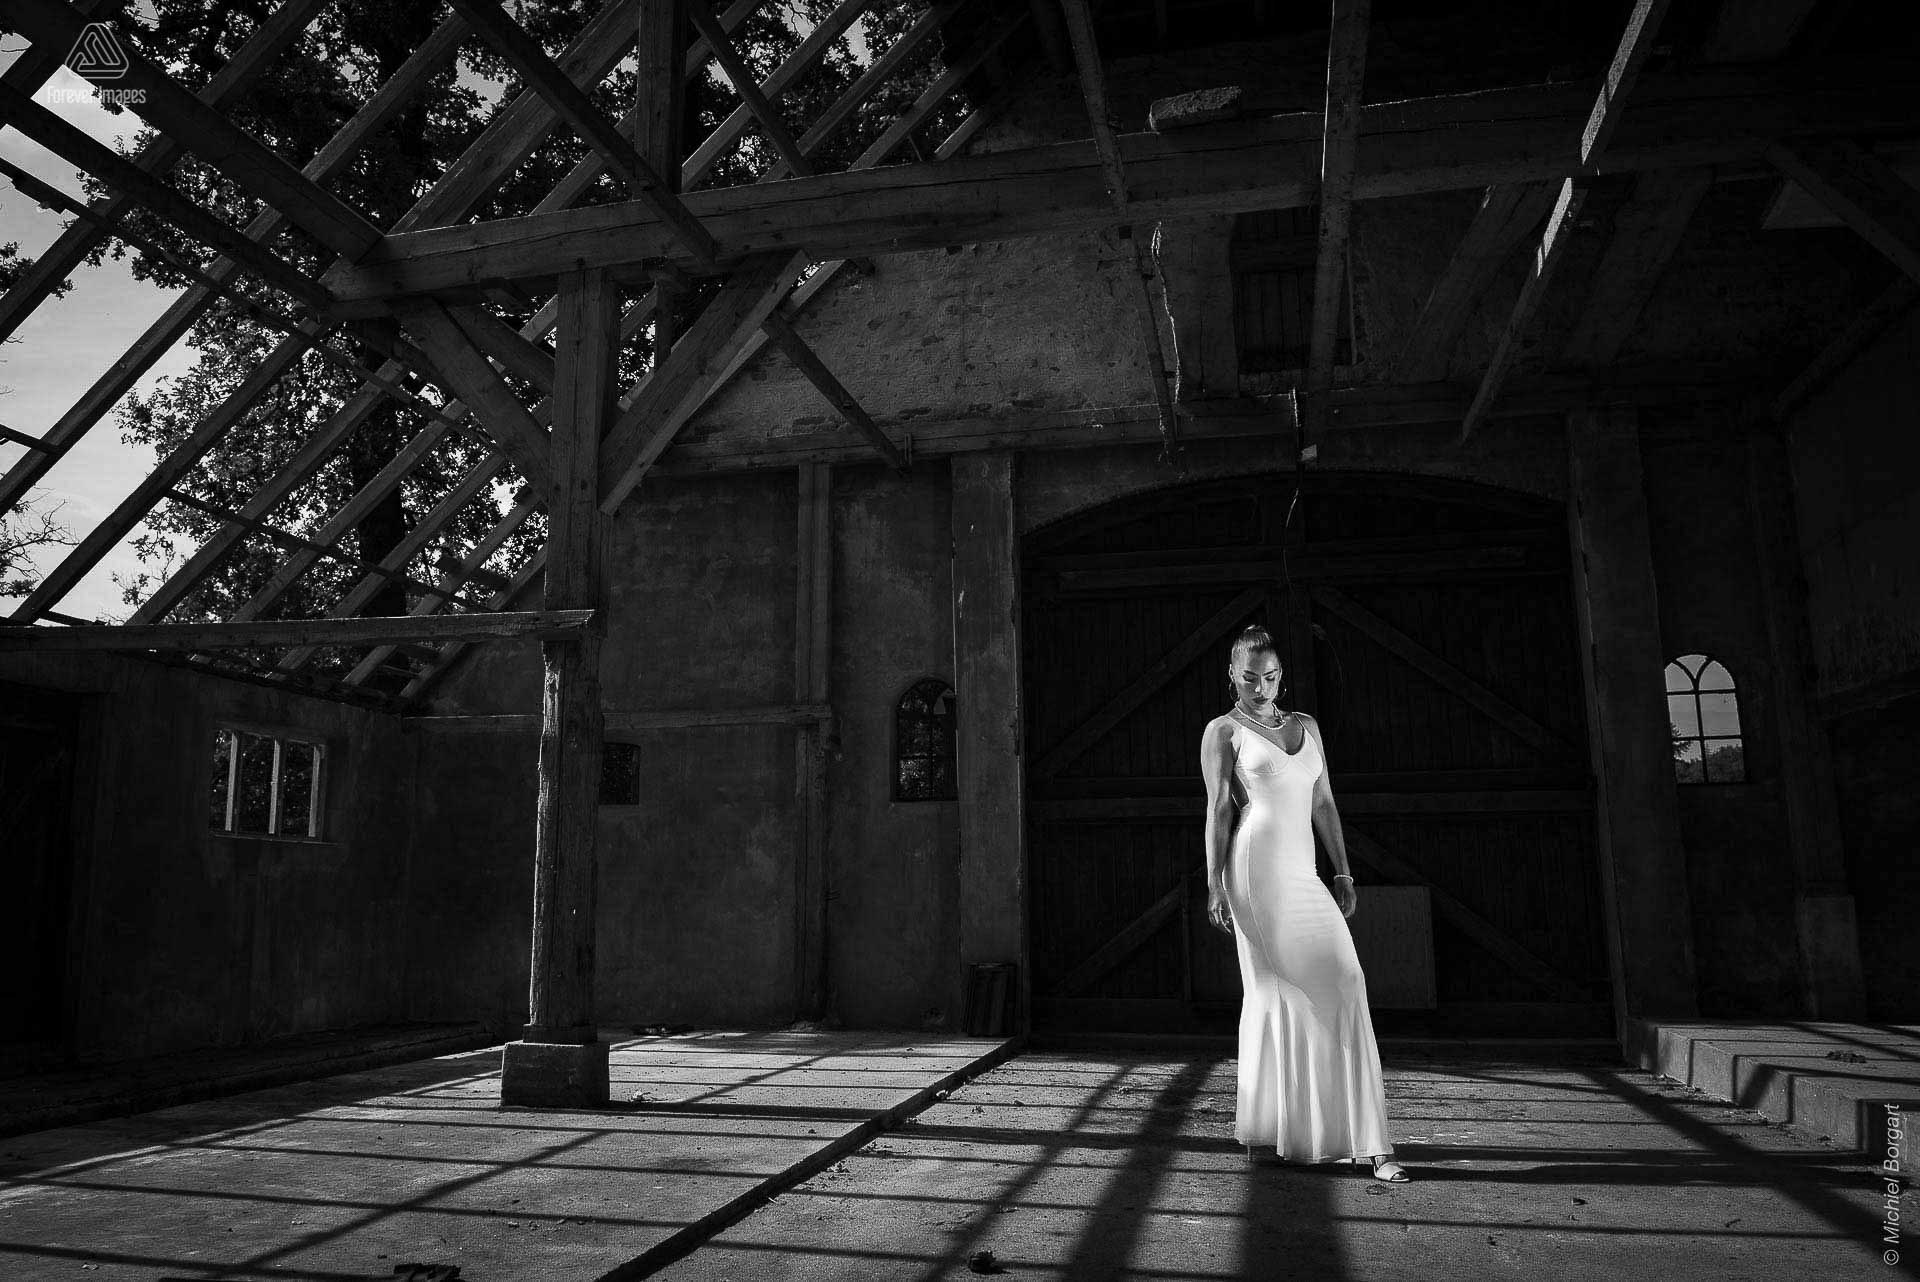 Portrait urbex black and white B&W beautiful lady in white dress old barn open roof | Floriana Horta | Portrait Photographer Michiel Borgart - Forever Images.